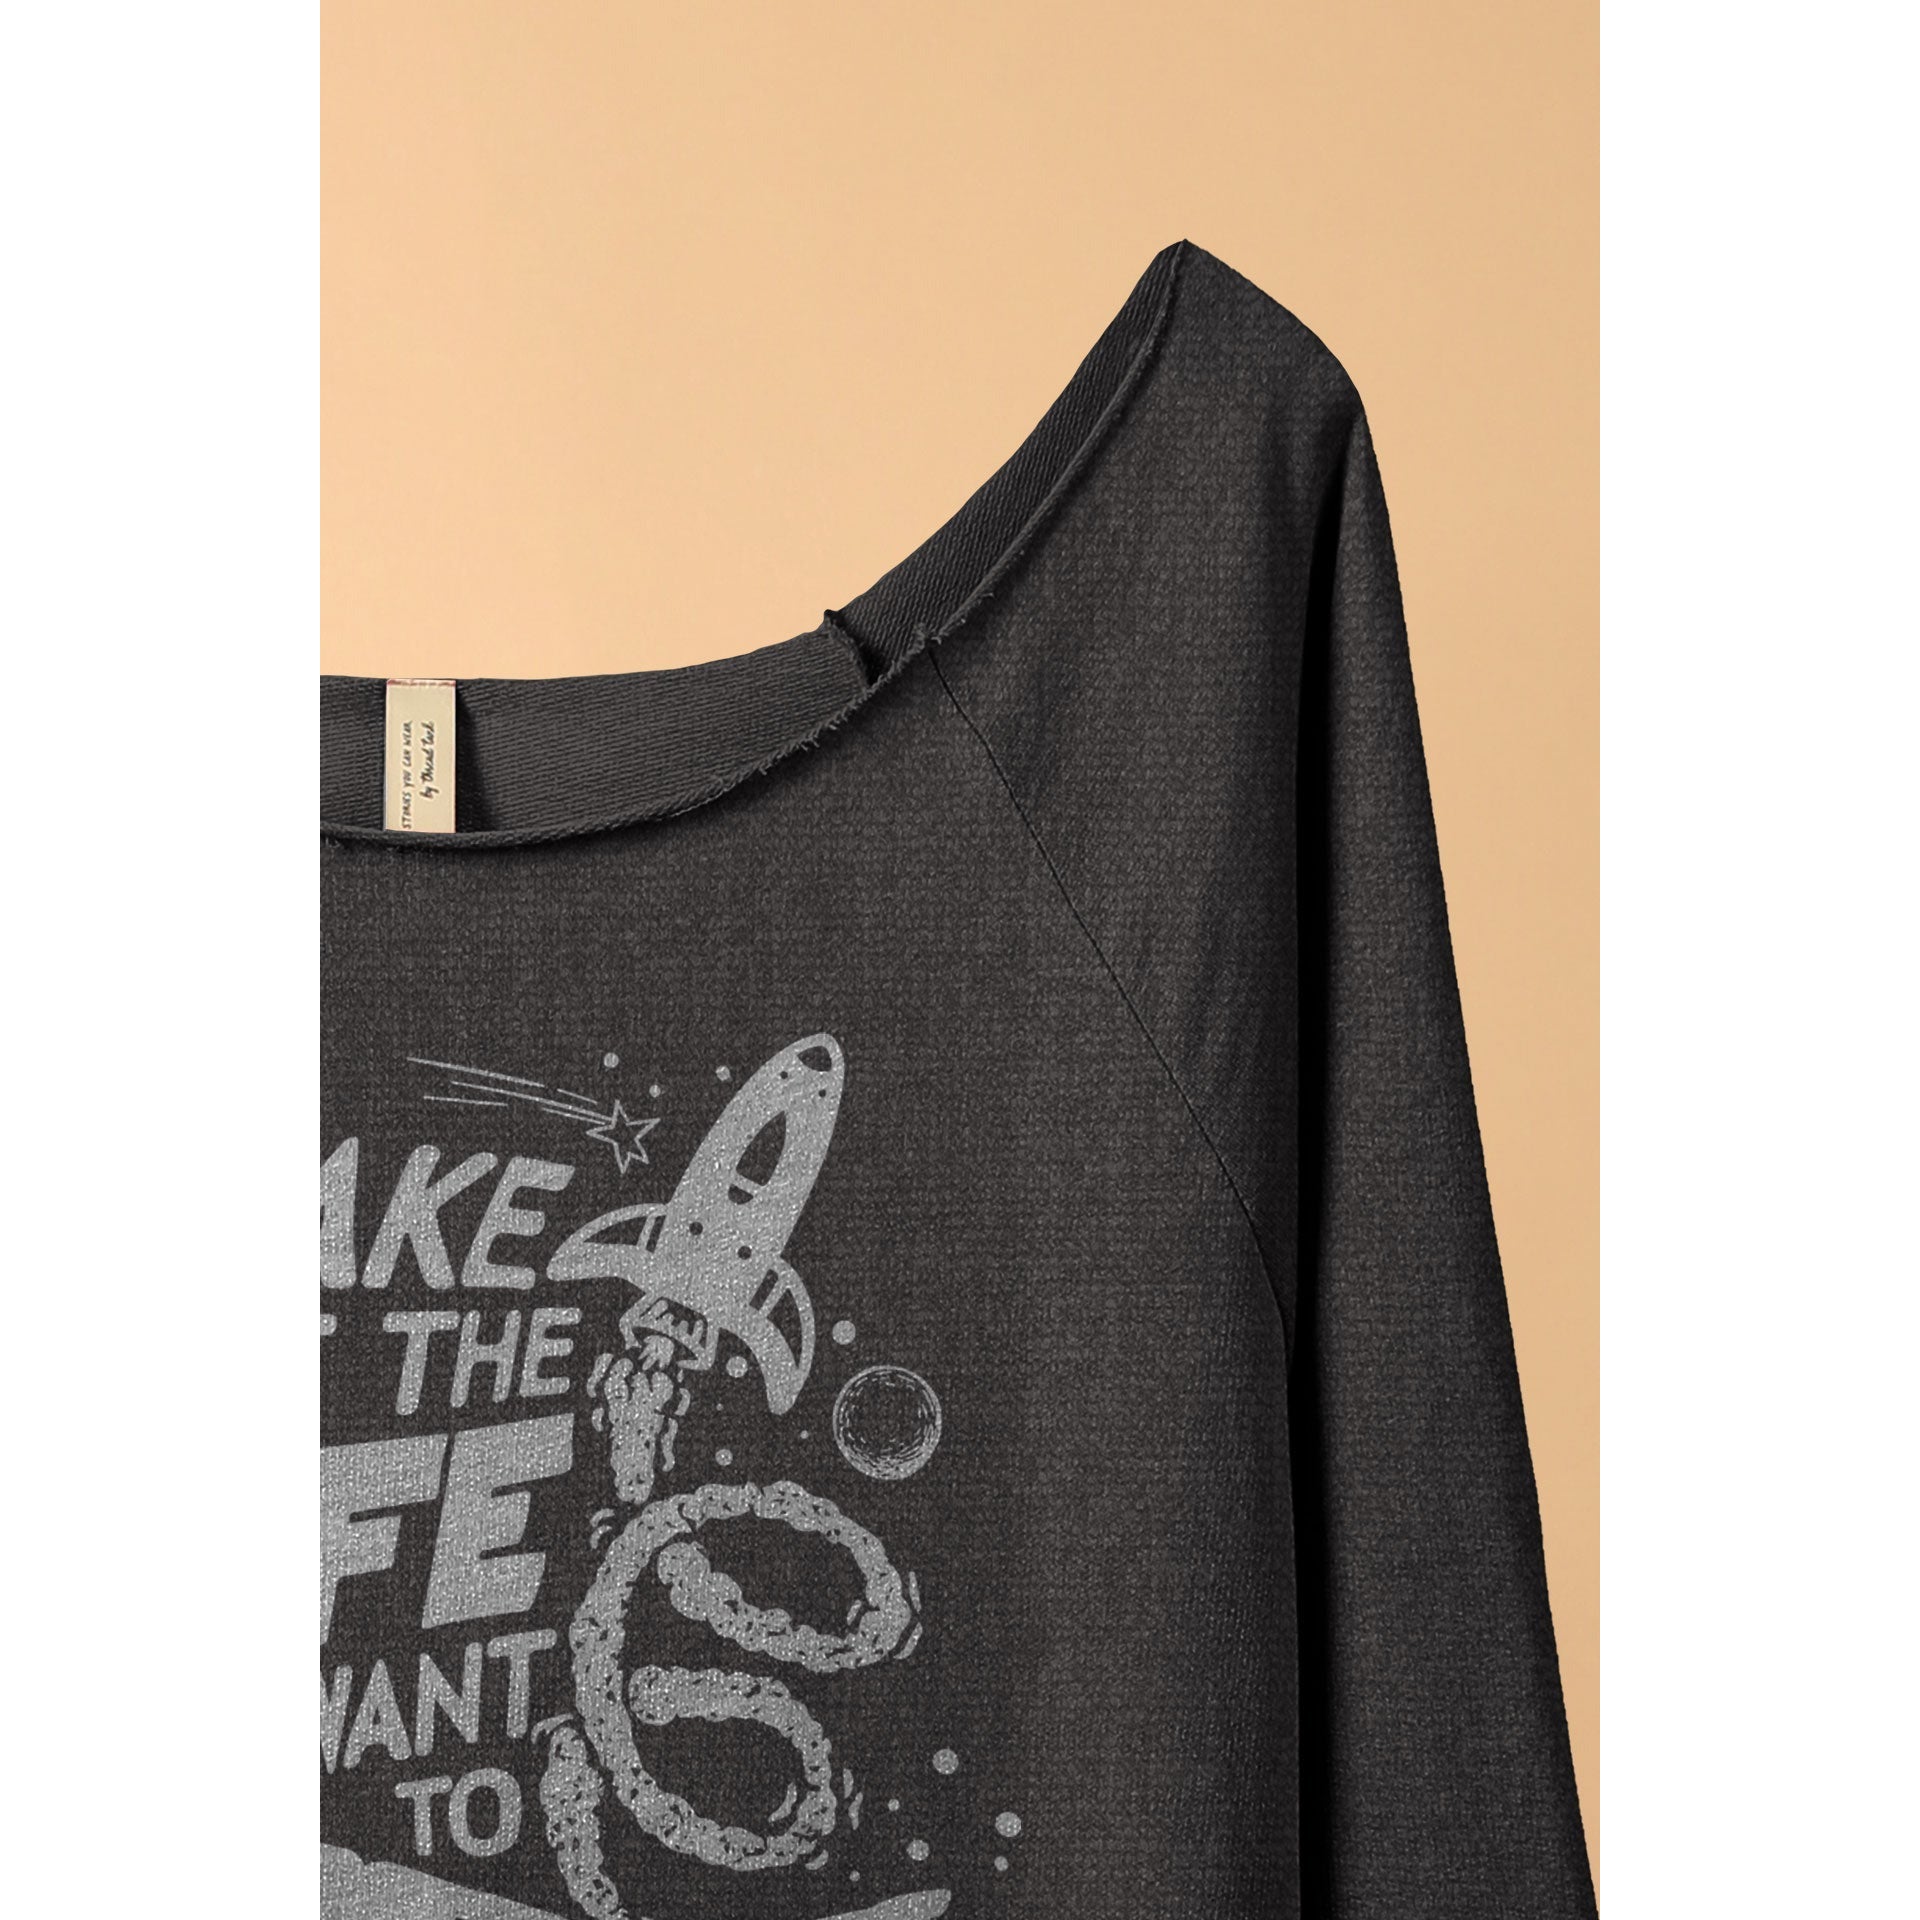 Make It the Life You Want To Live (1st African American Astronaut) - threadtank | stories you can wear